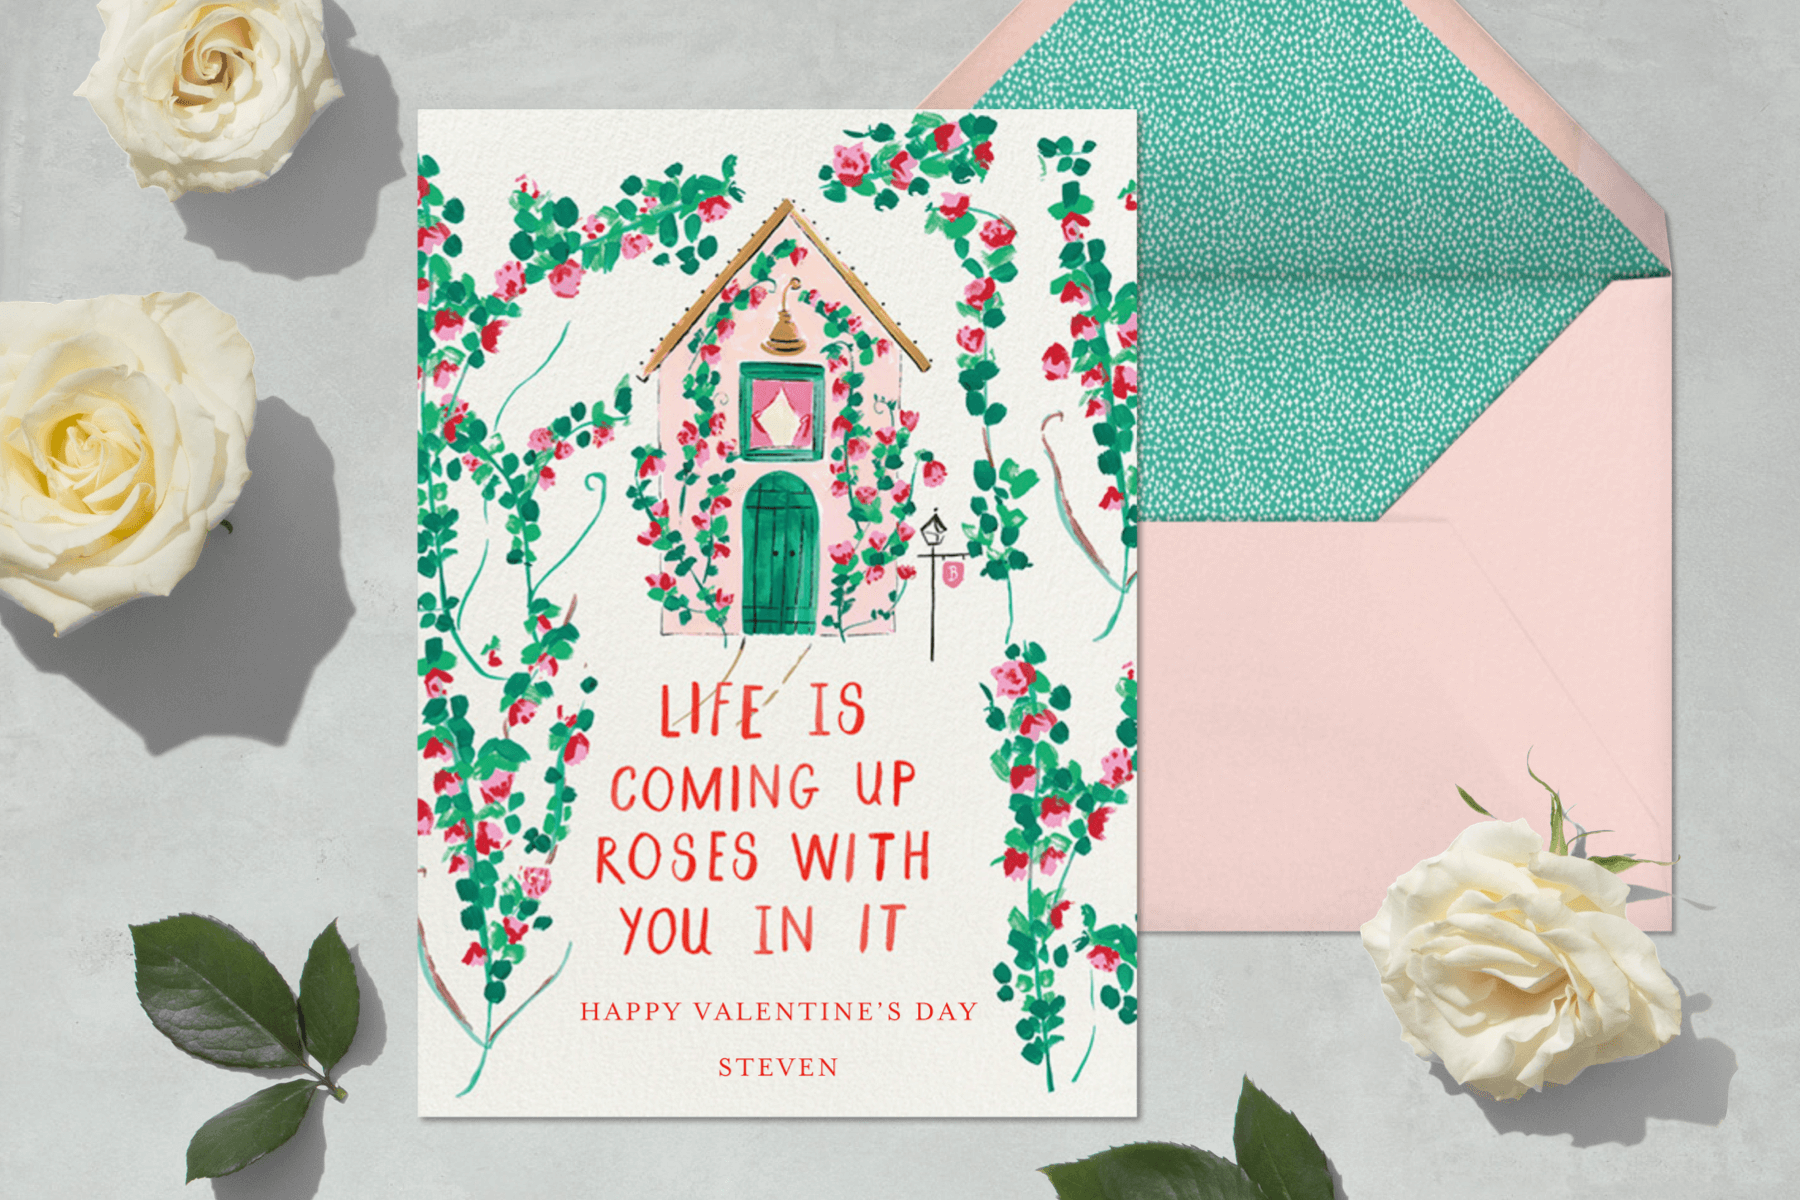 A Valentine’s Day card with an illustration of a house covered in vines.